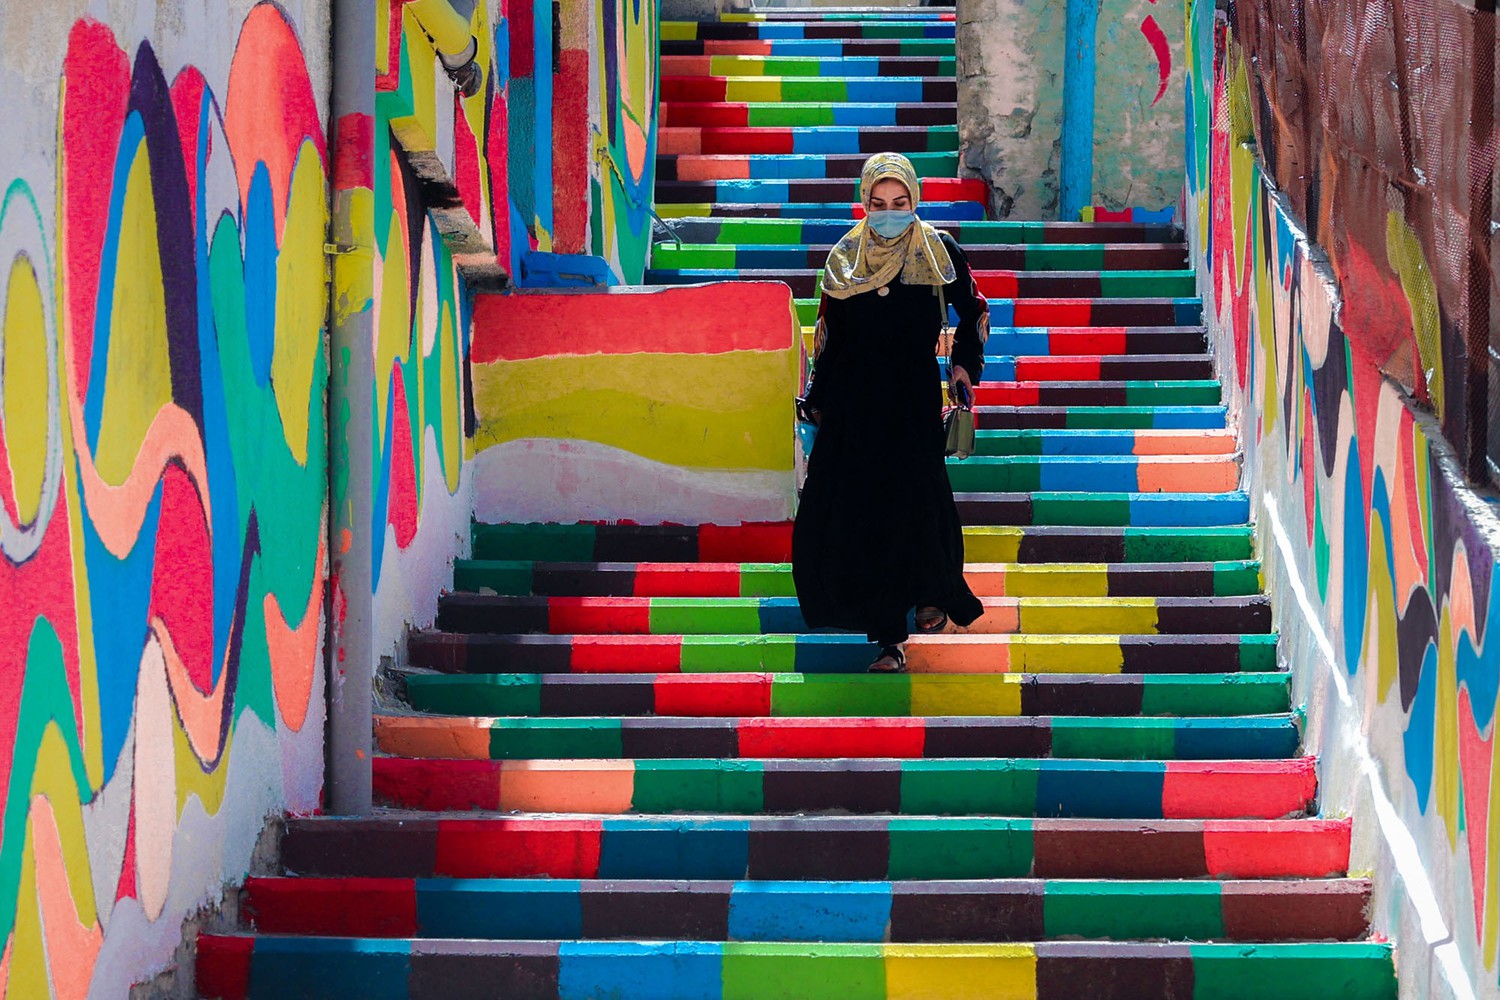 A woman walks down steps decorated with vibrant colors.